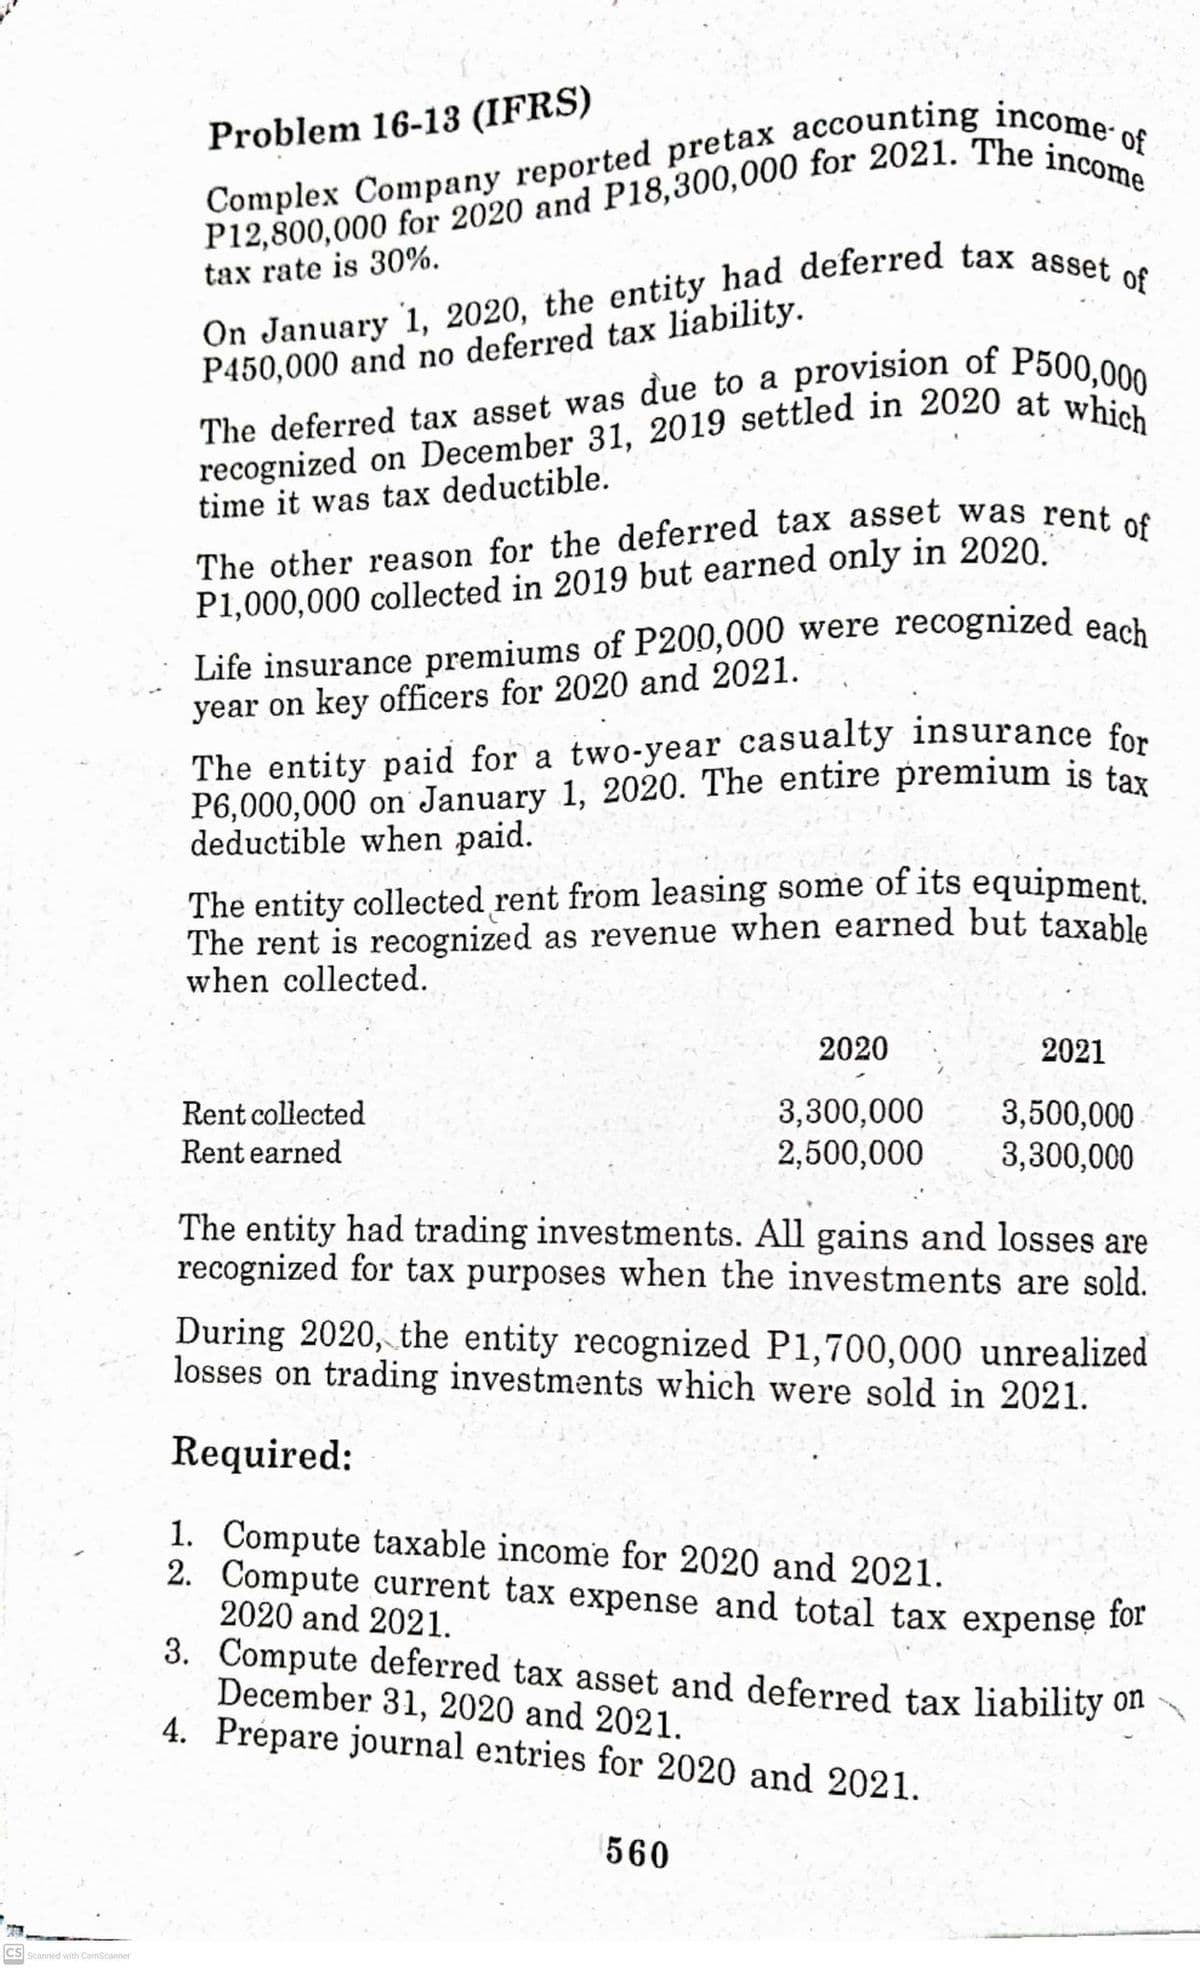 Problem 16-13 (IFRS)
tax rate is 30%.
P450,000 and no deferred tax liability.
provision of P500,000
The deferred tax asset was due to a
time it was tax deductible.
P1,000,000 collected in 2019 but earned only in 2020.
recognized each
Life insurance premiums of P200,000 were
year on key officers for 2020 and 2021.
The entity paid for a two-year casualty insurance for
P6,000,000 on January 1, 2020. The entire premium is tar
deductible when paid.
The entity collected rent from leasing some of its equipment.
The rent is recognized as revenue when earned but taxable
when collected.
2020
2021
3,300,000
2,500,000
3,500,000
3,300,000
Rent collected
Rent earned
The entity had trading investments. All gains and losses are
recognized for tax purposes when the investments are sold.
During 2020, the entity recognized P1,700,000 unrealized
losses on trading investments which were sold in 2021.
Required:
1. Compute taxable income for 2020 and 2021.
2. Compute current tax expense and total tax expense for
2020 and 2021.
3. Compute deferred tax asset and deferred tax liability on
December 31, 2020 and 2021.
4. Prépare journal entries for 2020 and 2021.
560
CS
Scanned with CamScanner
